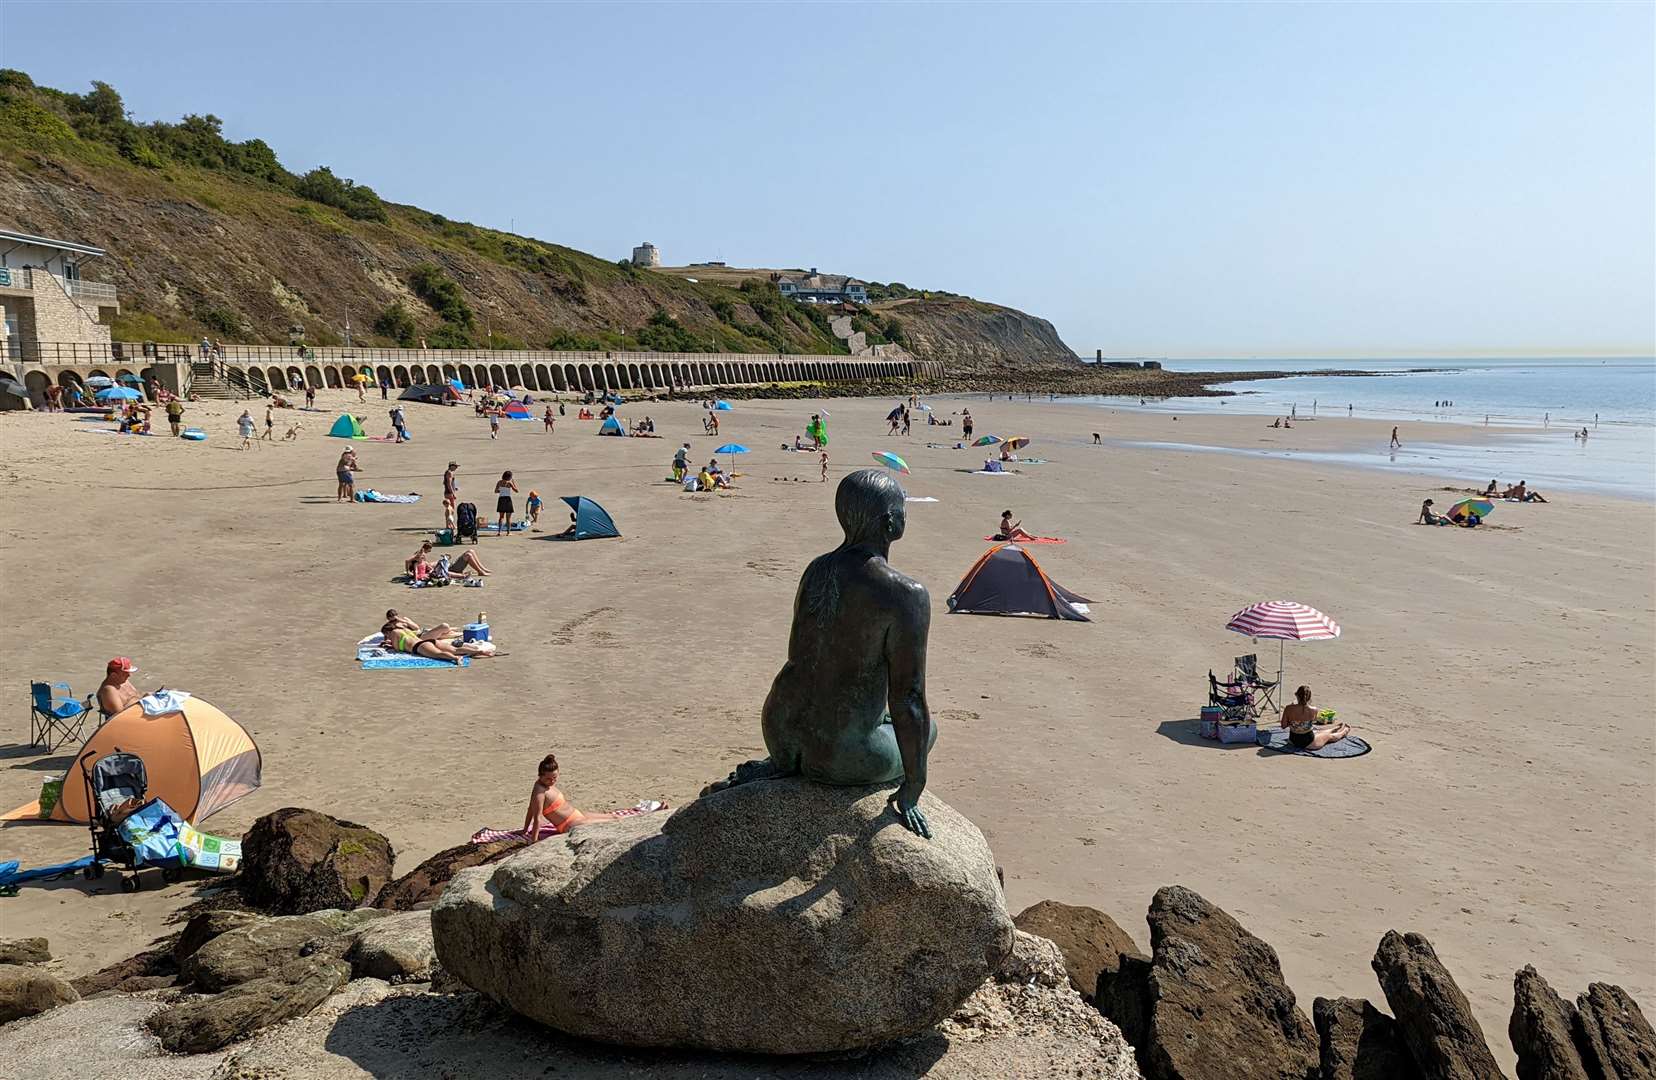 Despite a heat health warning, plenty of people took to the beach during the heatwave of July 2022